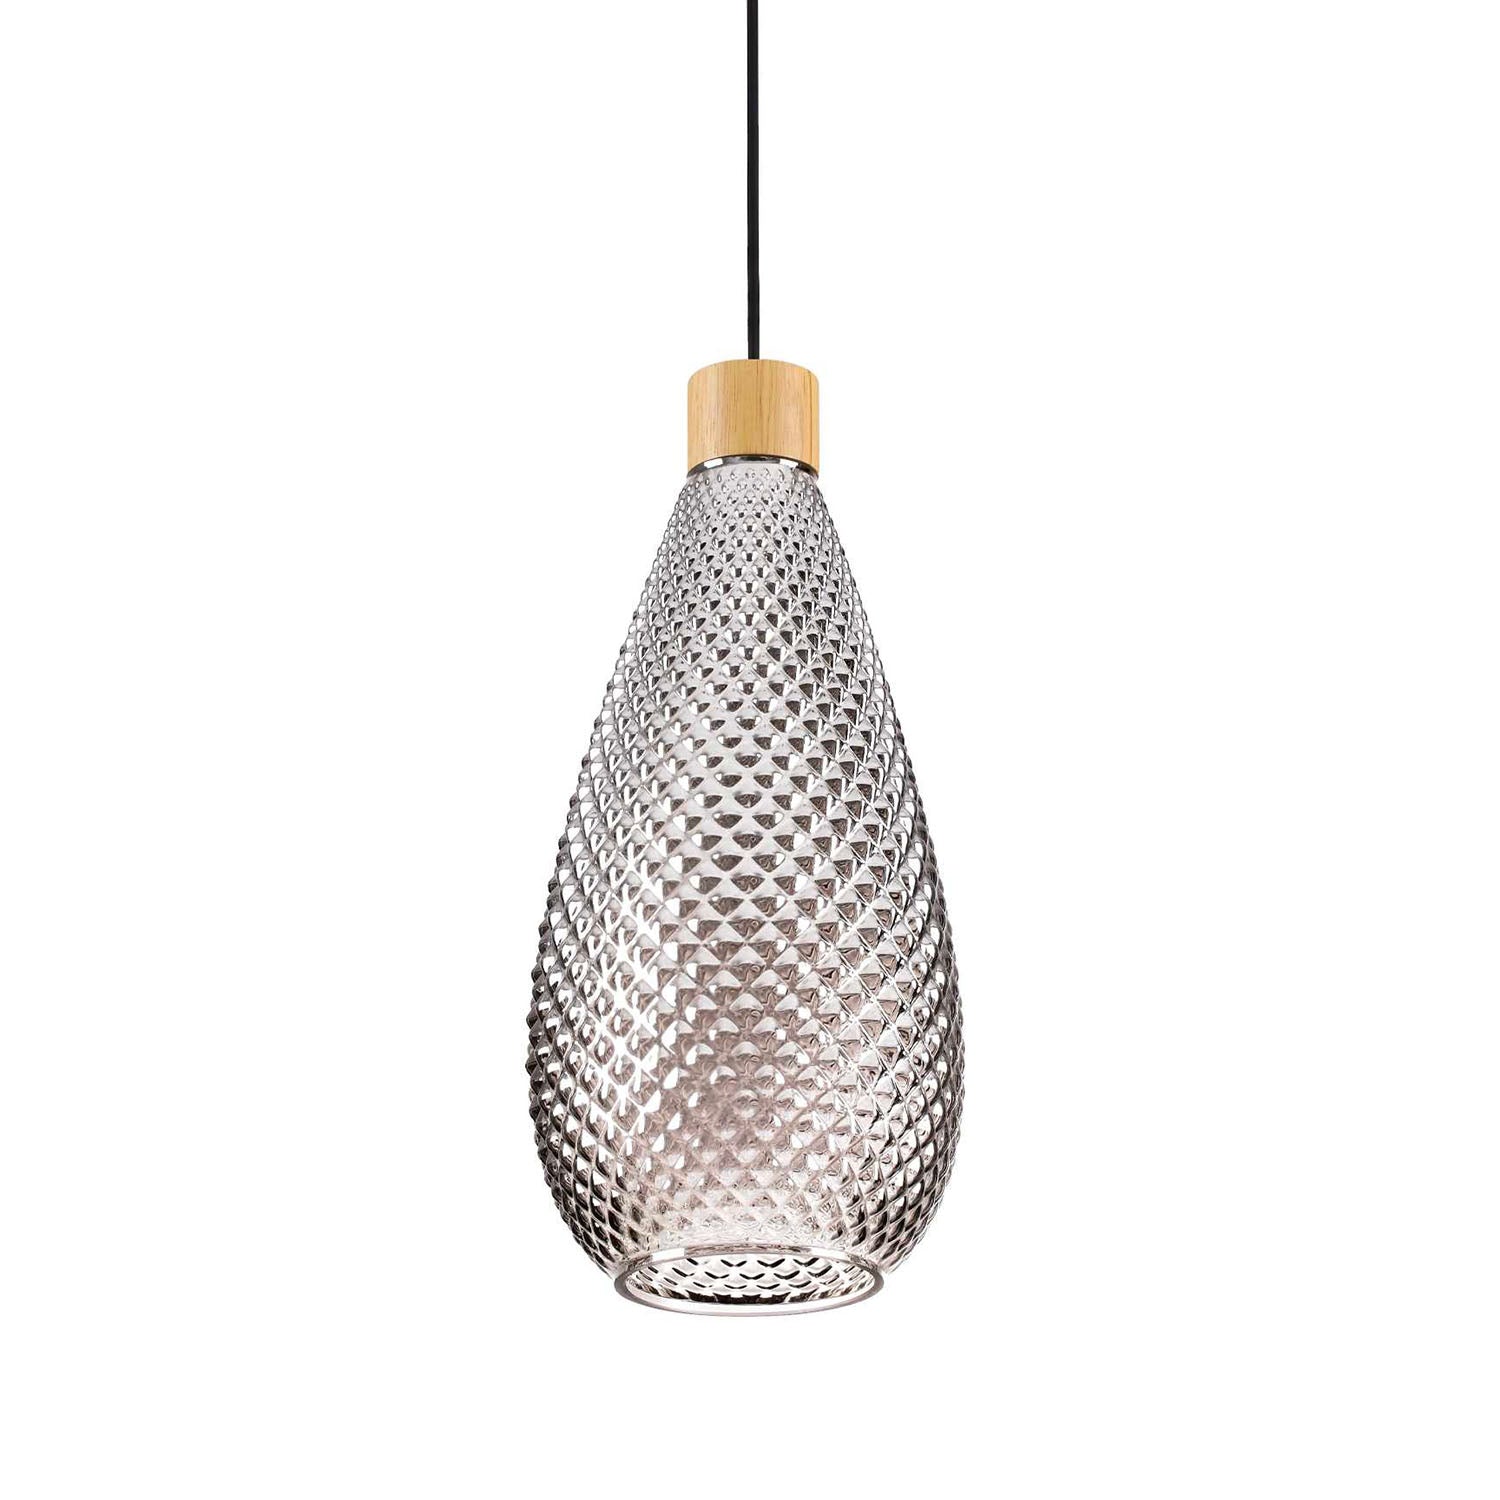 BERGEN - Vintage pendant light in smoked glass and wood